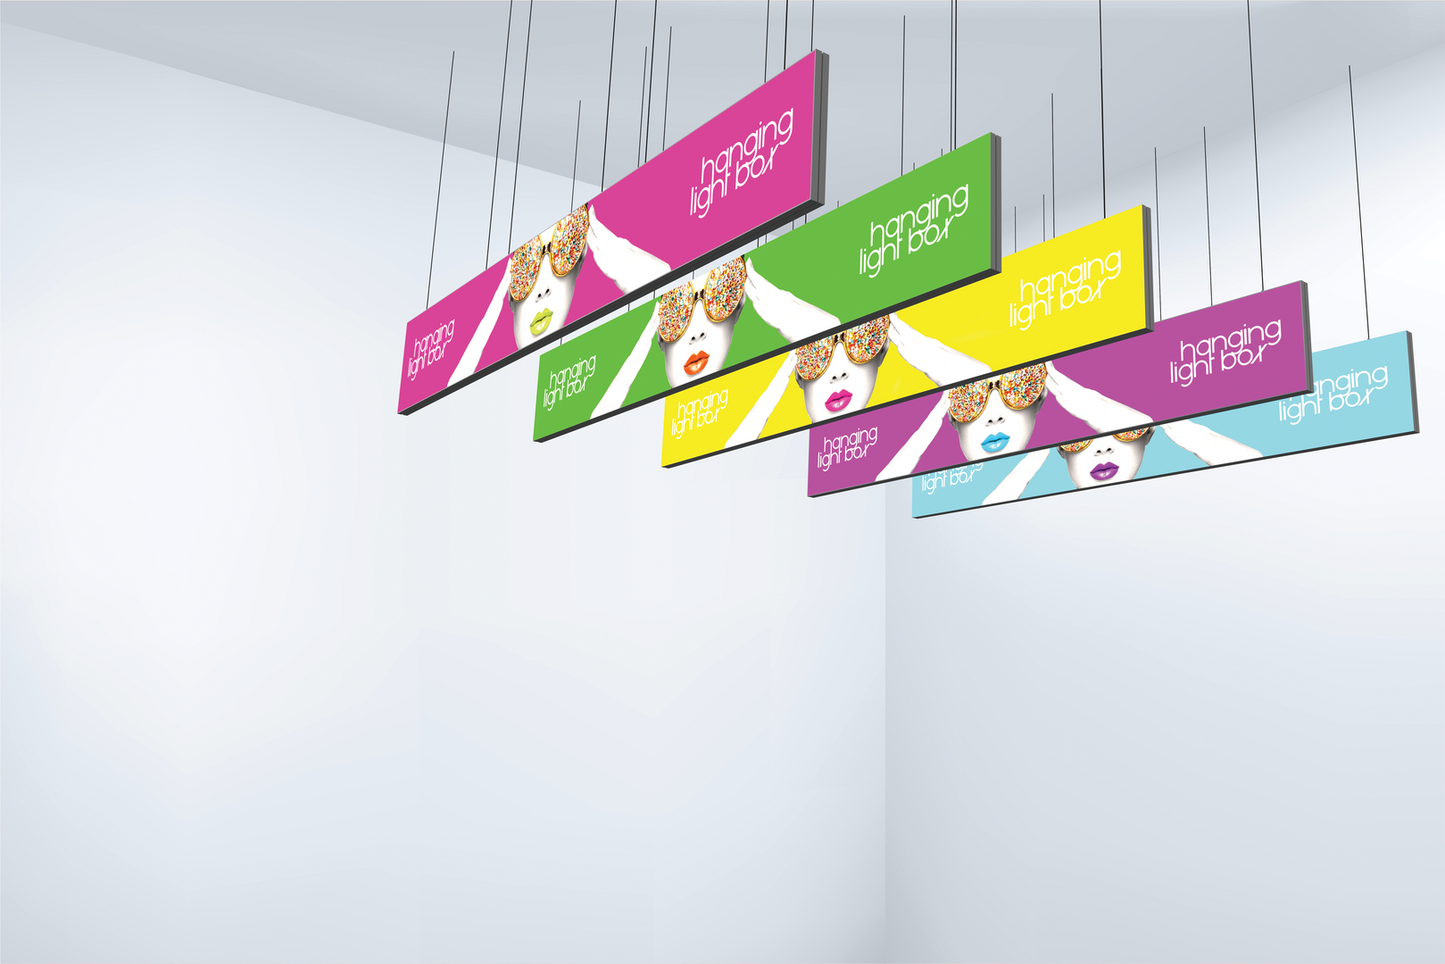 40ft x 4ft Vector Frame Hanging Light Box Single-Sided (Graphic Only)